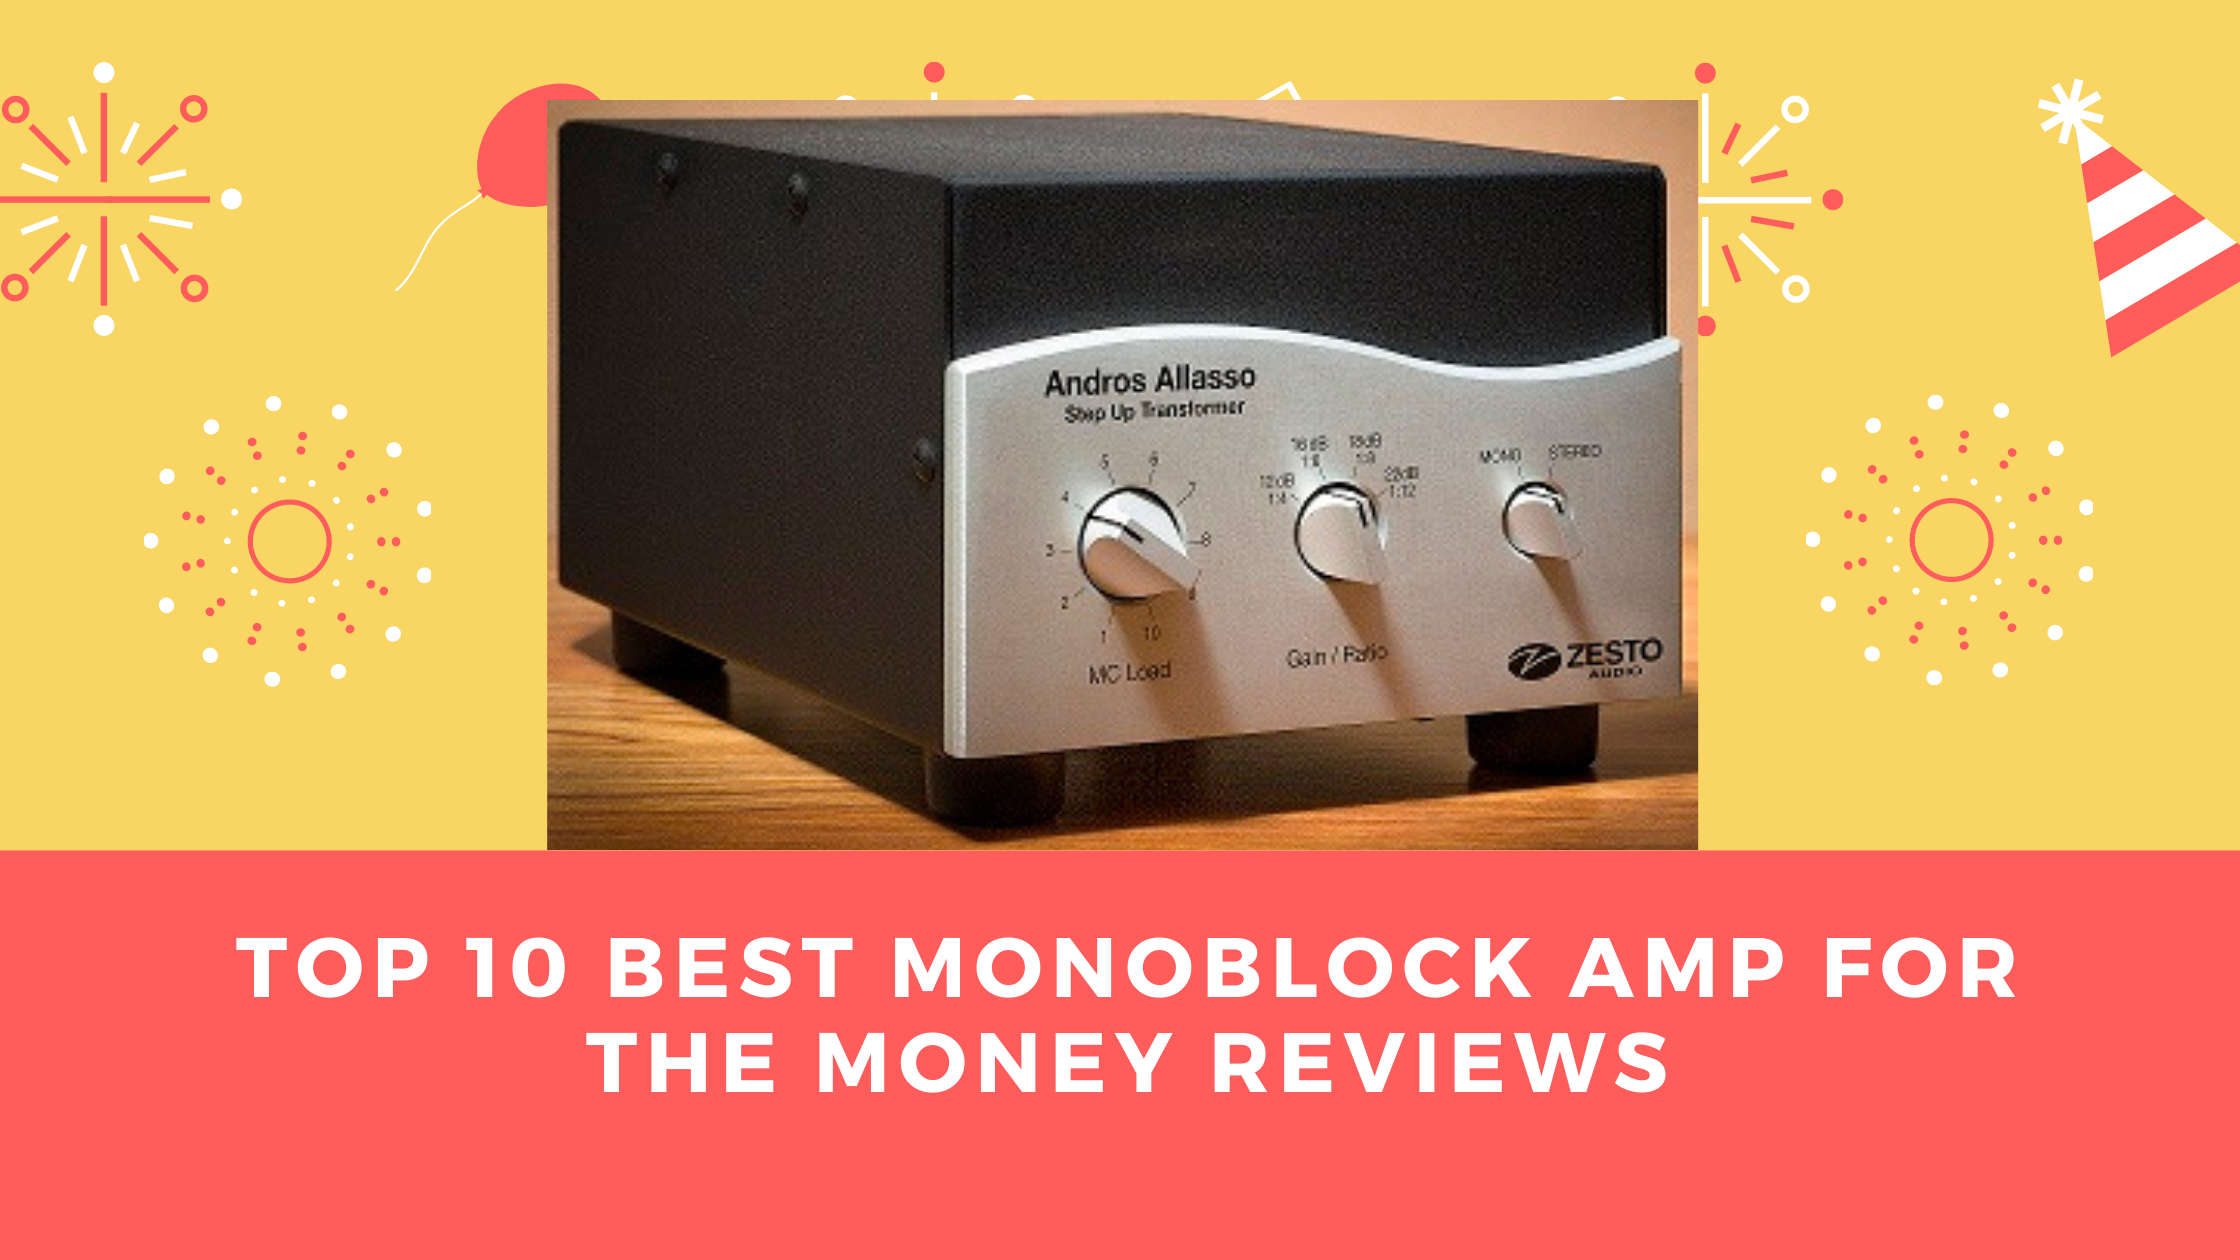 Top 10 Best Monoblock Amp for the Money Reviews